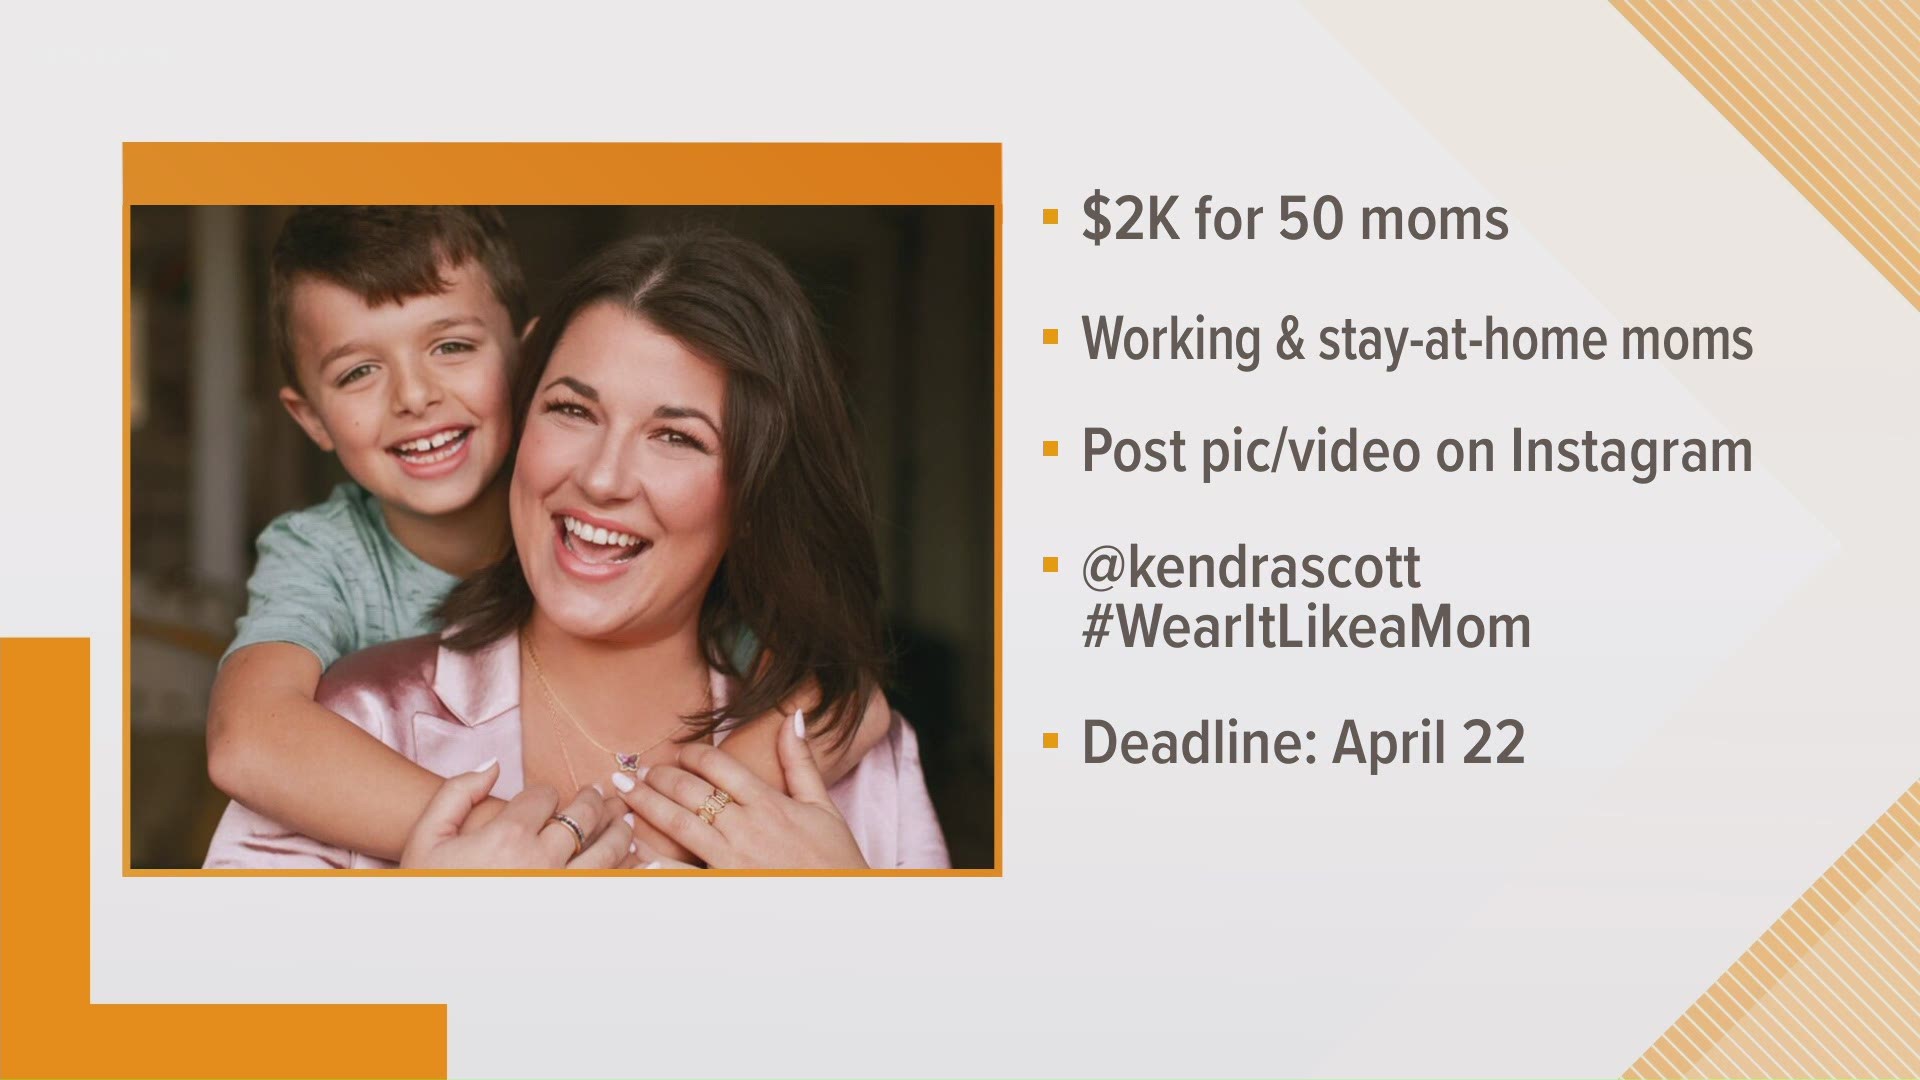 Moms have until April 22 to apply for the gift.